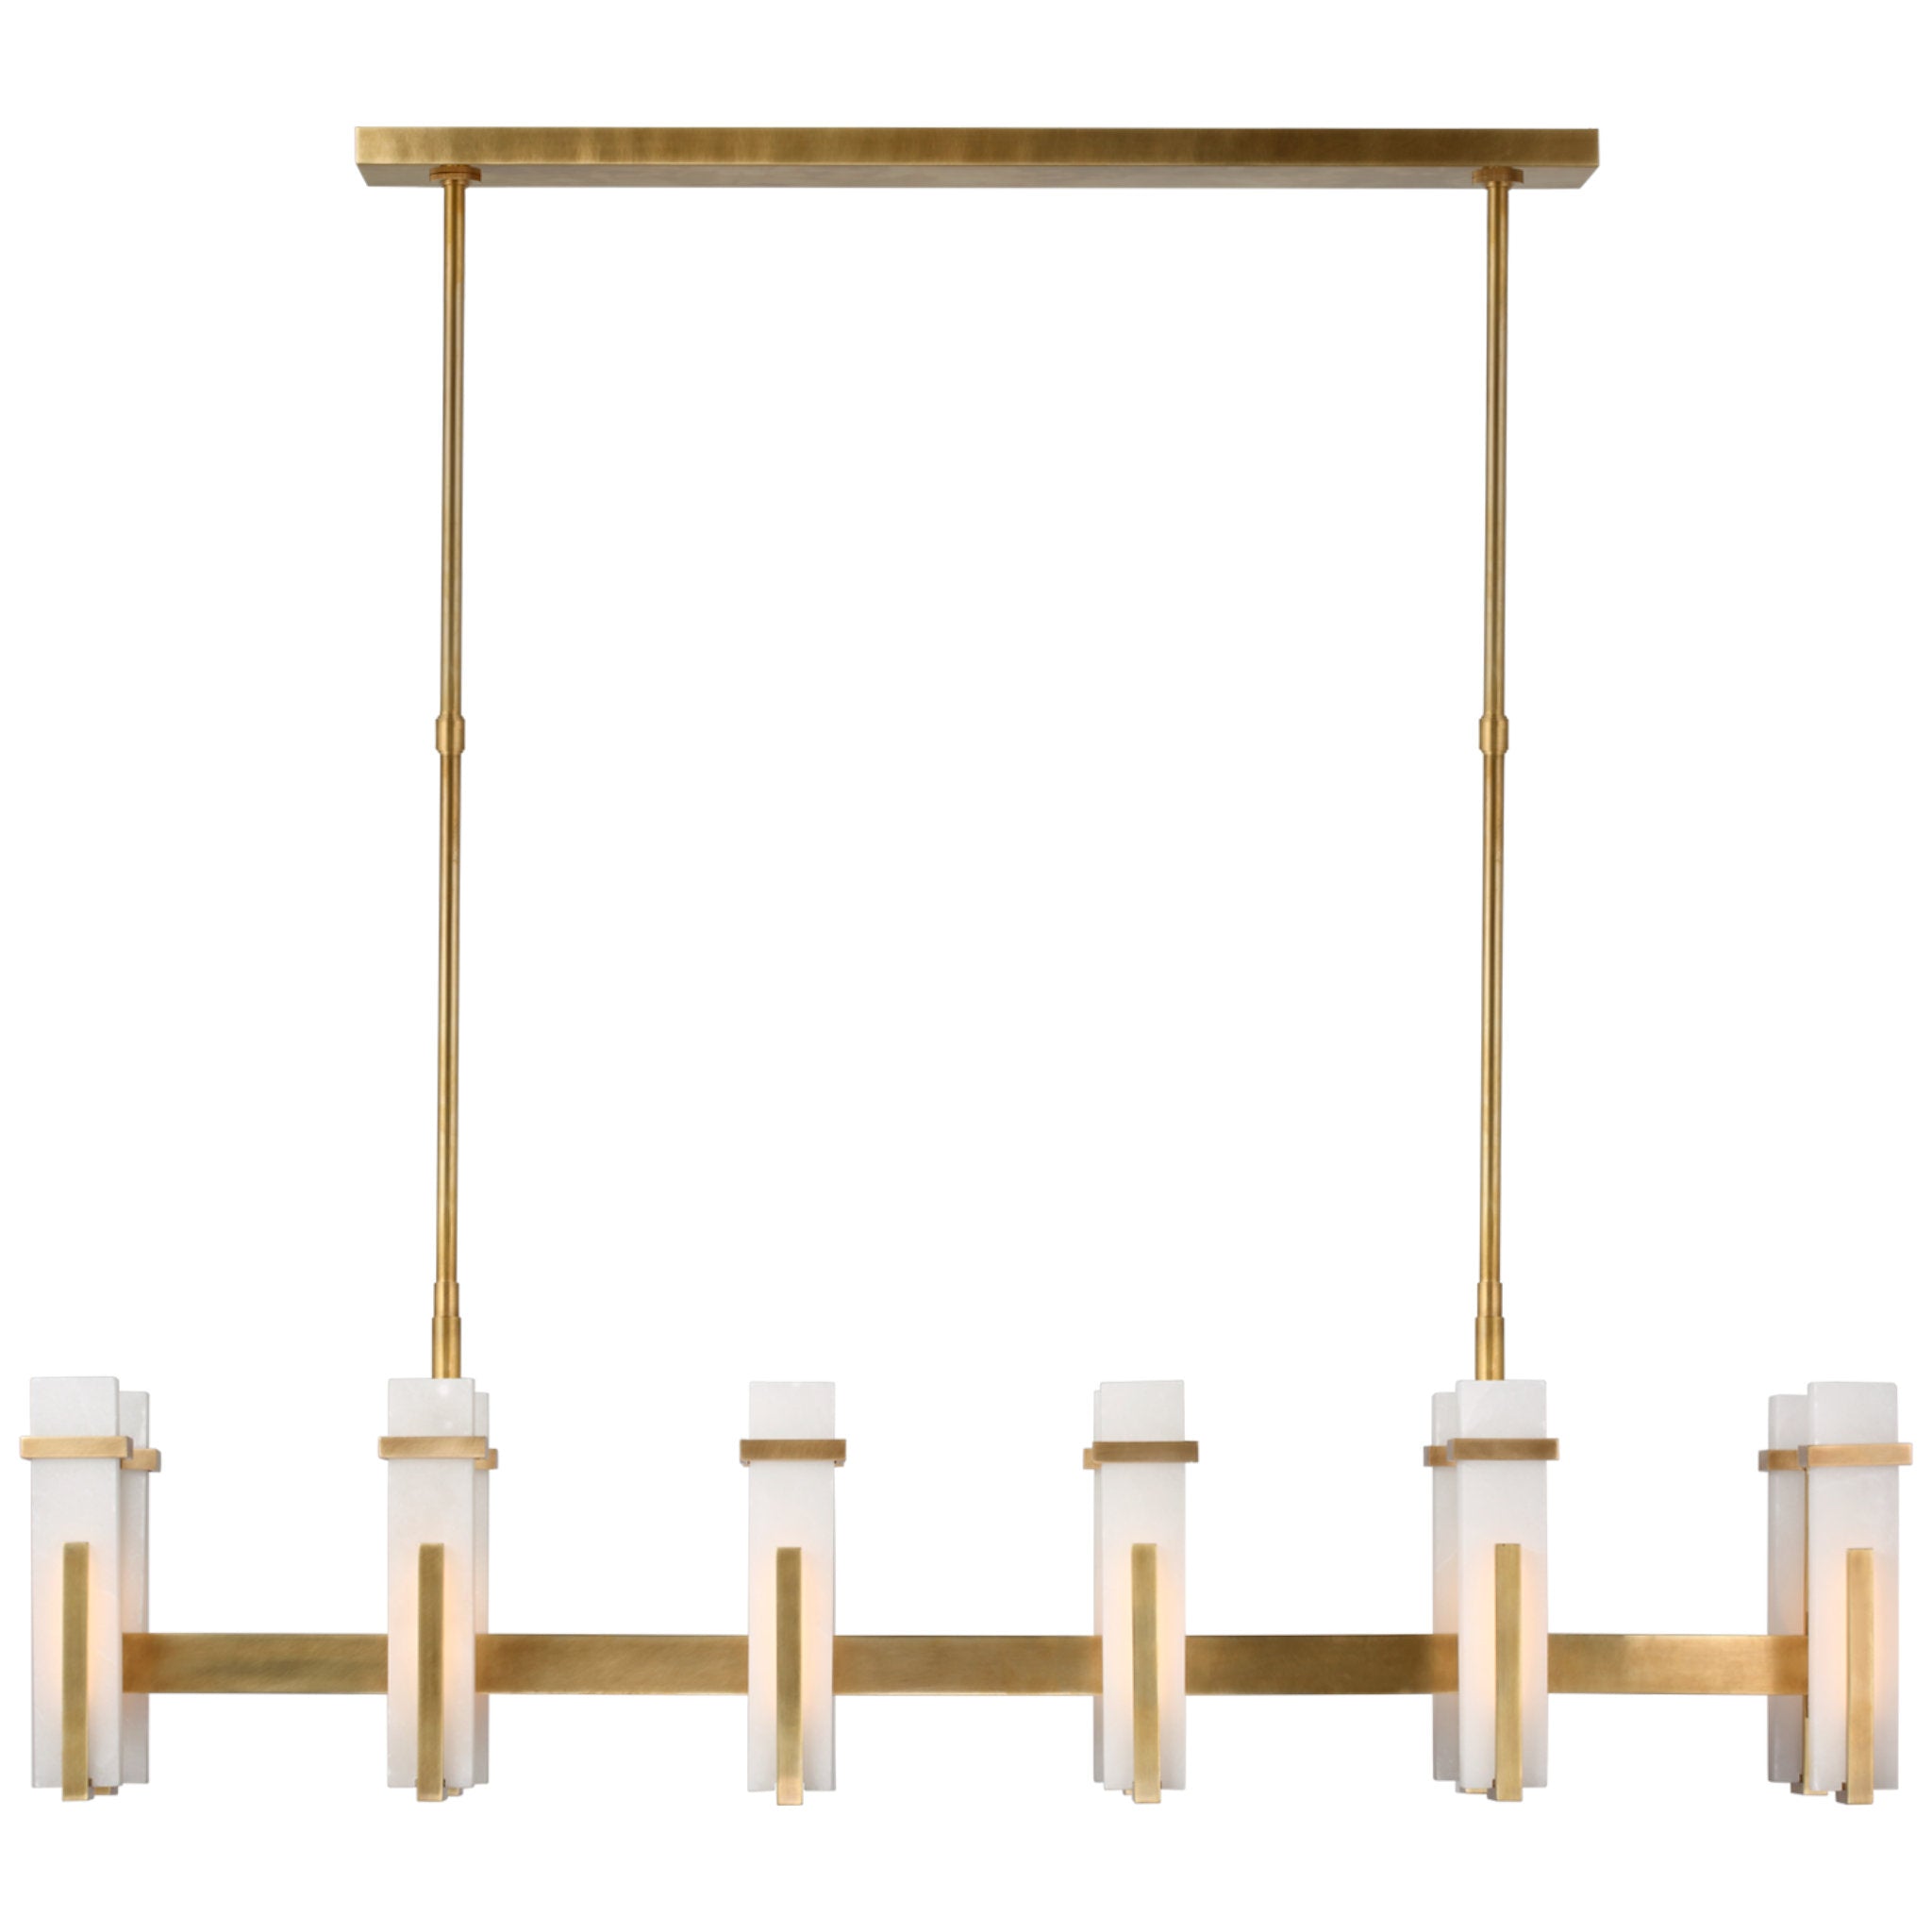 Ian K. Fowler Malik Large Linear Chandelier in Hand-Rubbed Antique Brass with Alabaster